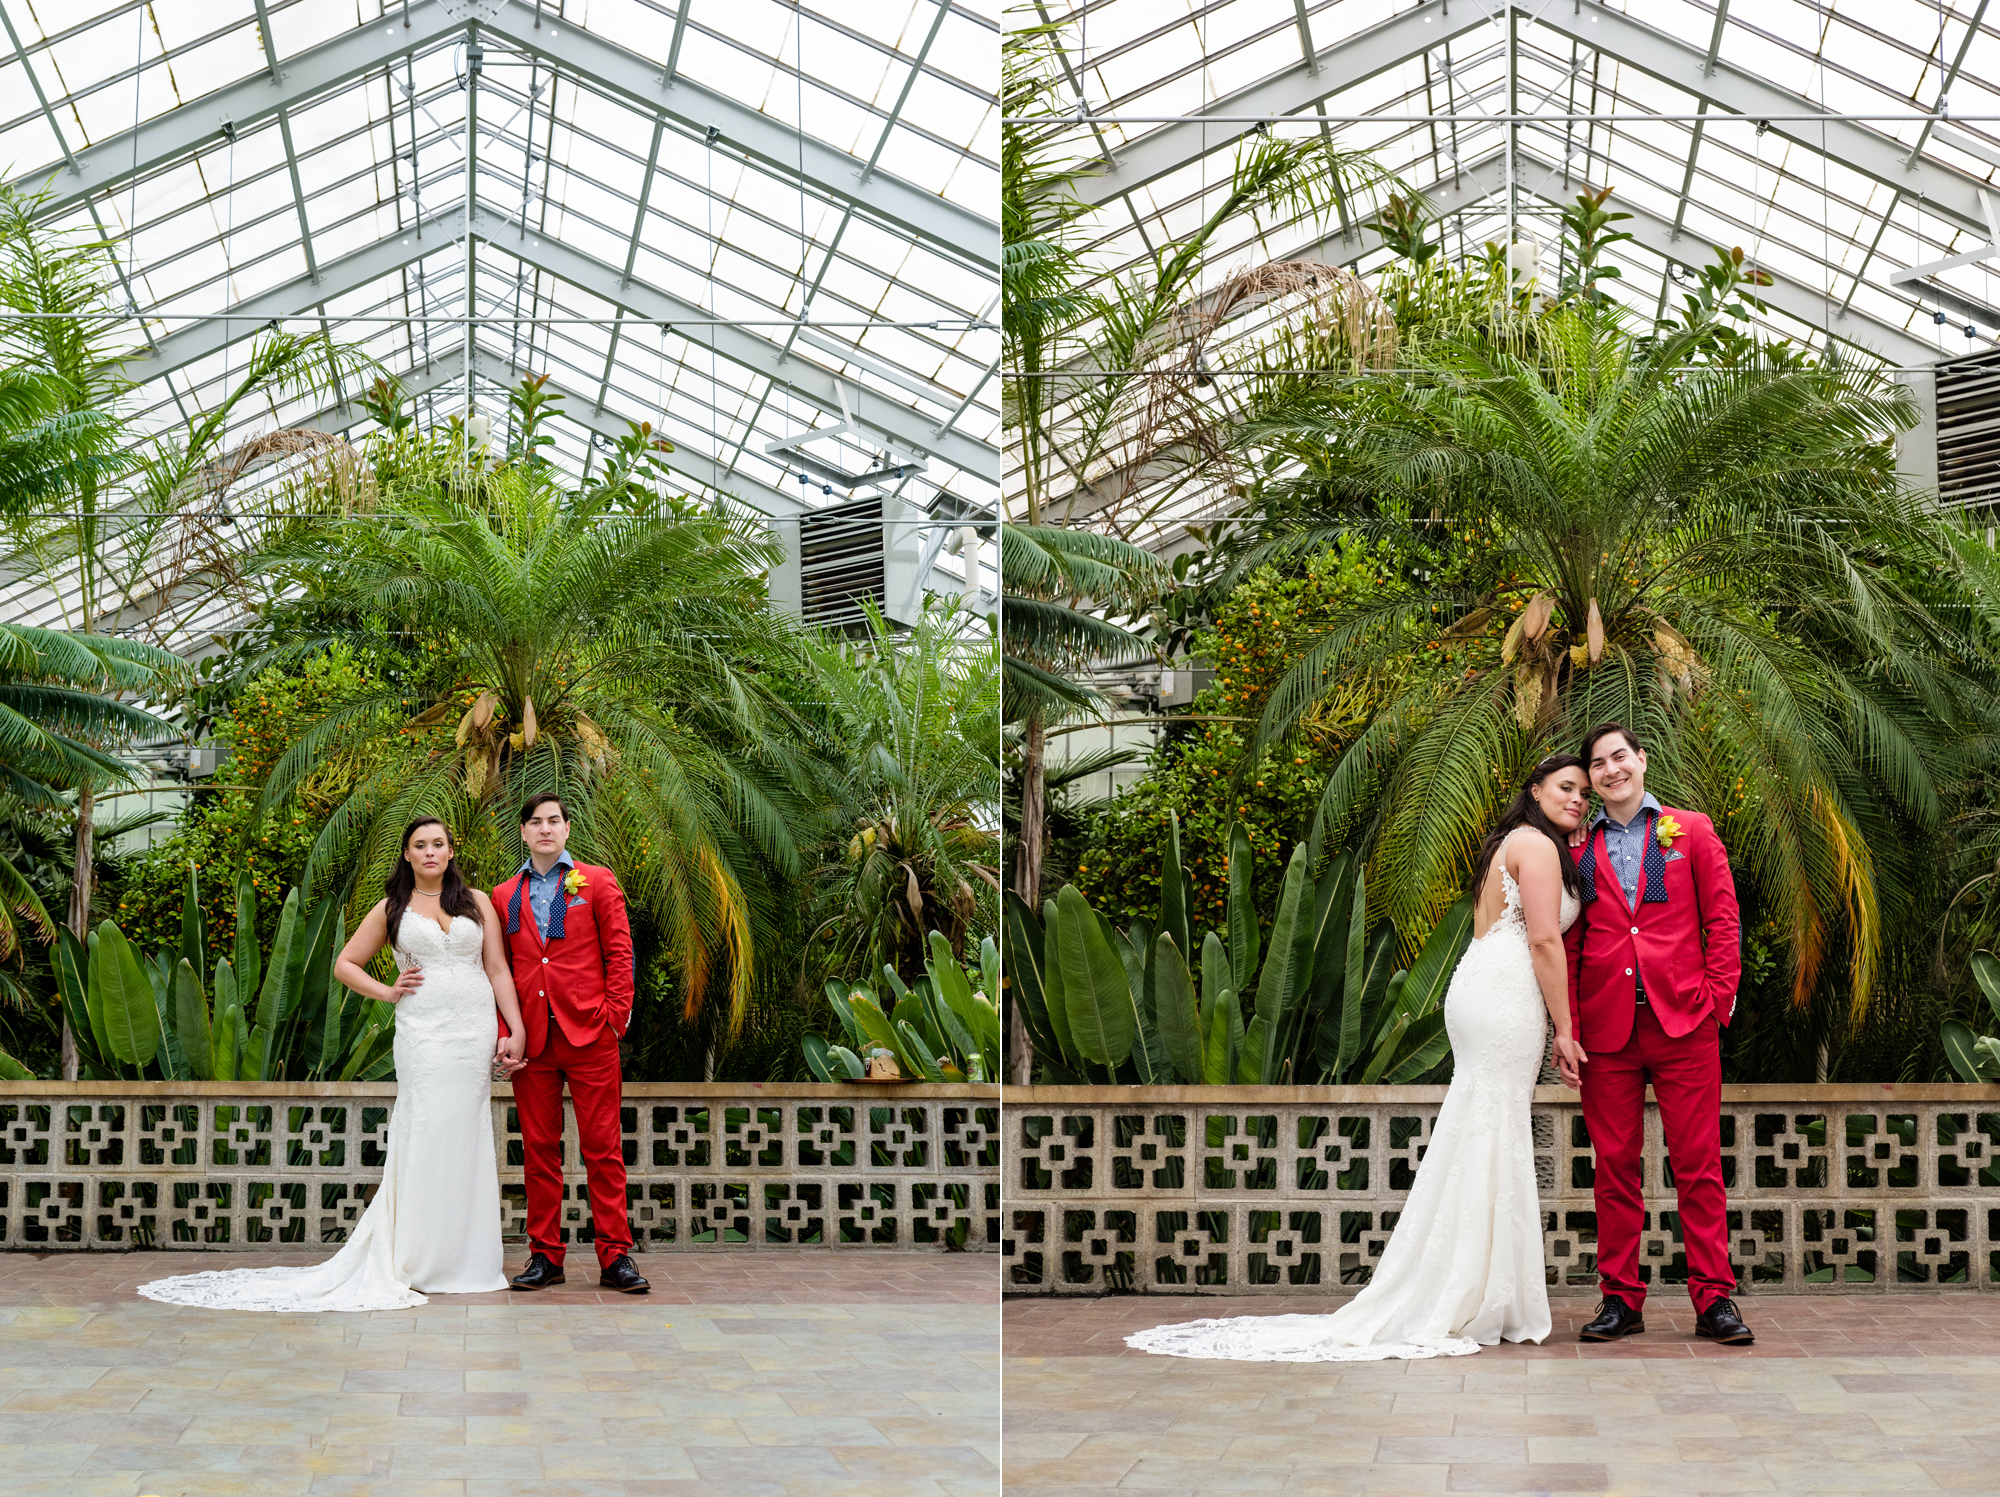 Bride & Groom portraits after their wedding ceremony at Potawatomi Conservatory